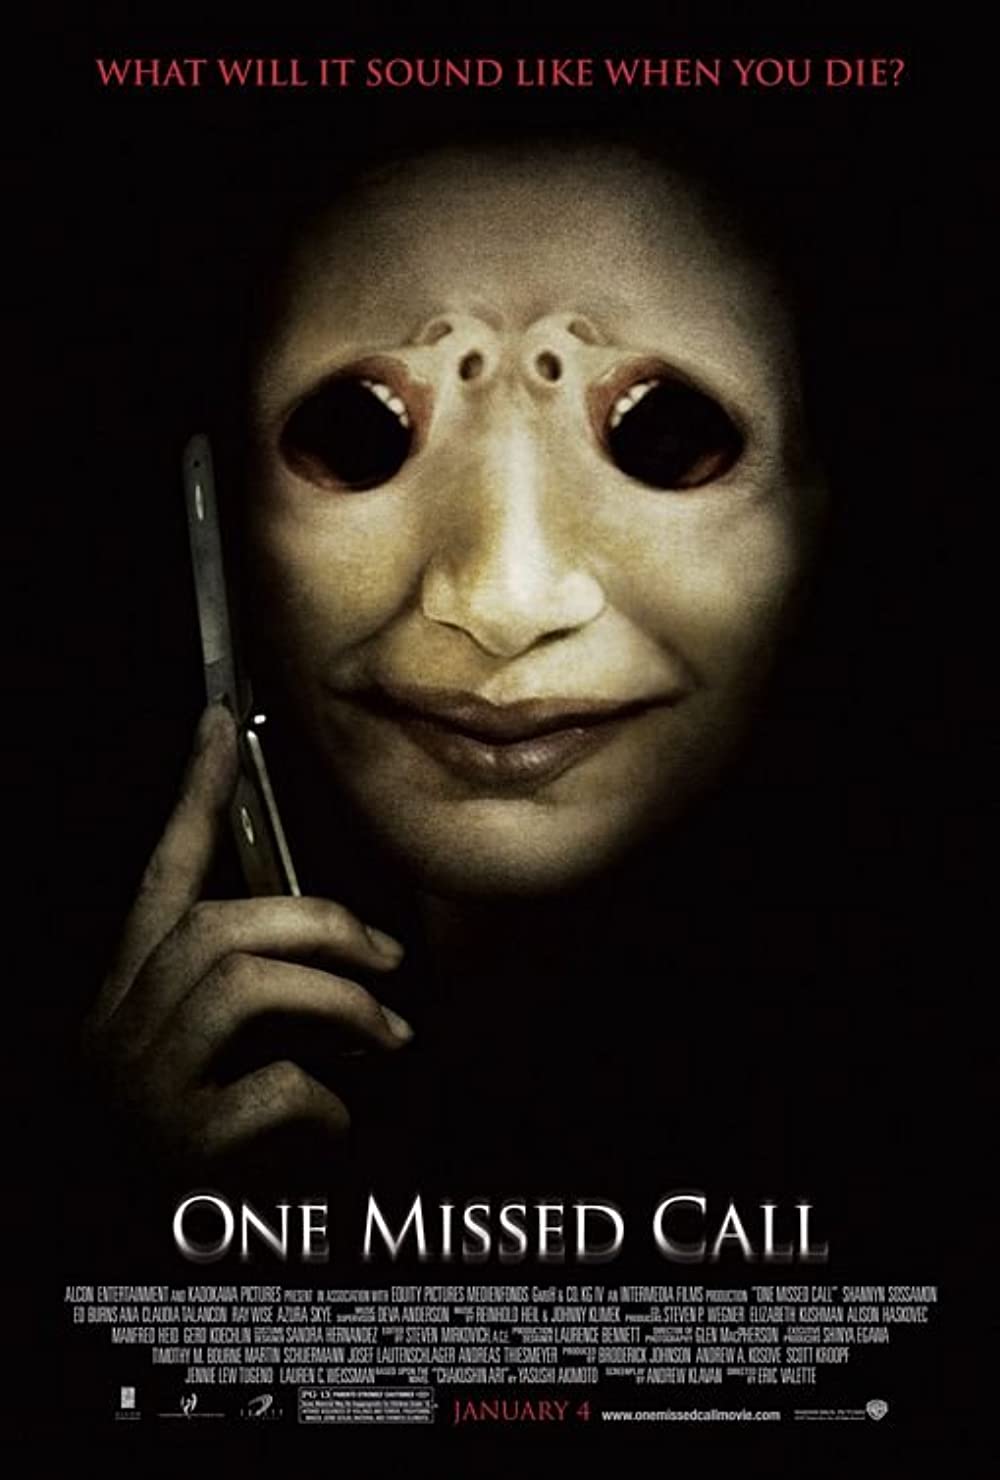 Ma Điện Thoại – One Missed Call (2008)'s poster